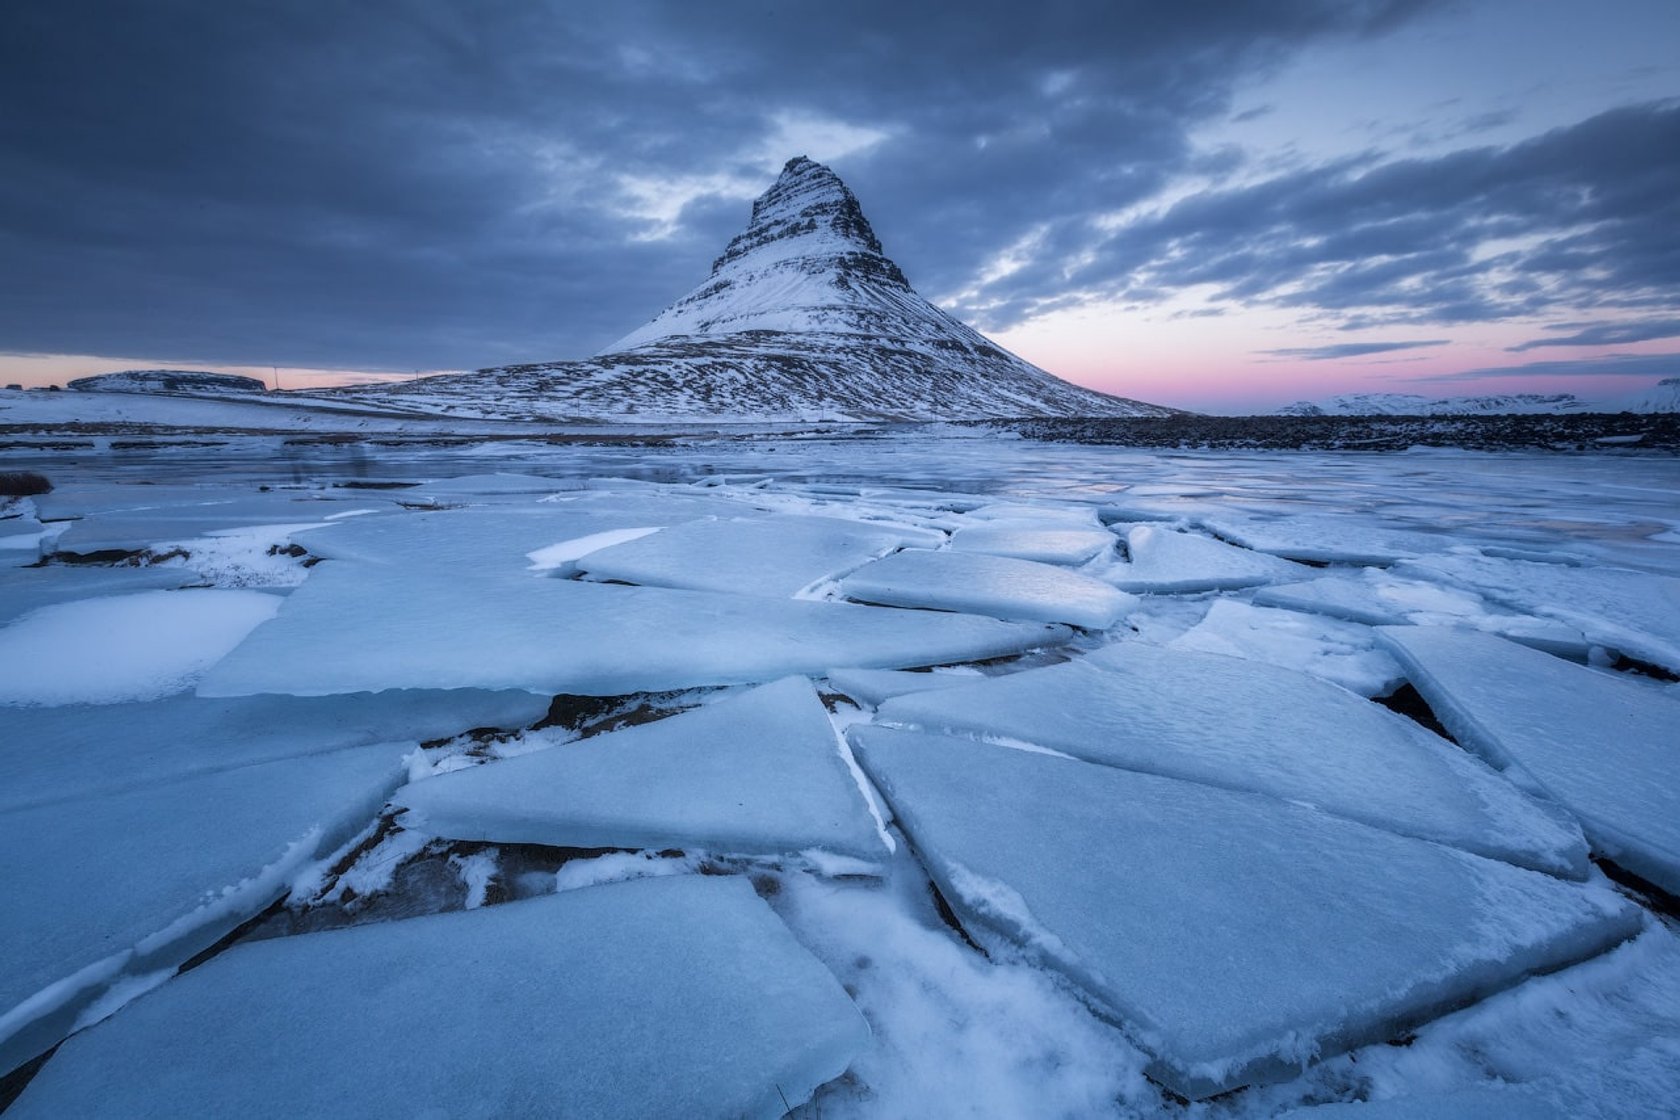 Traveling to Iceland can dramatically improve your photography skills and even unlock new life opportunities.(6)